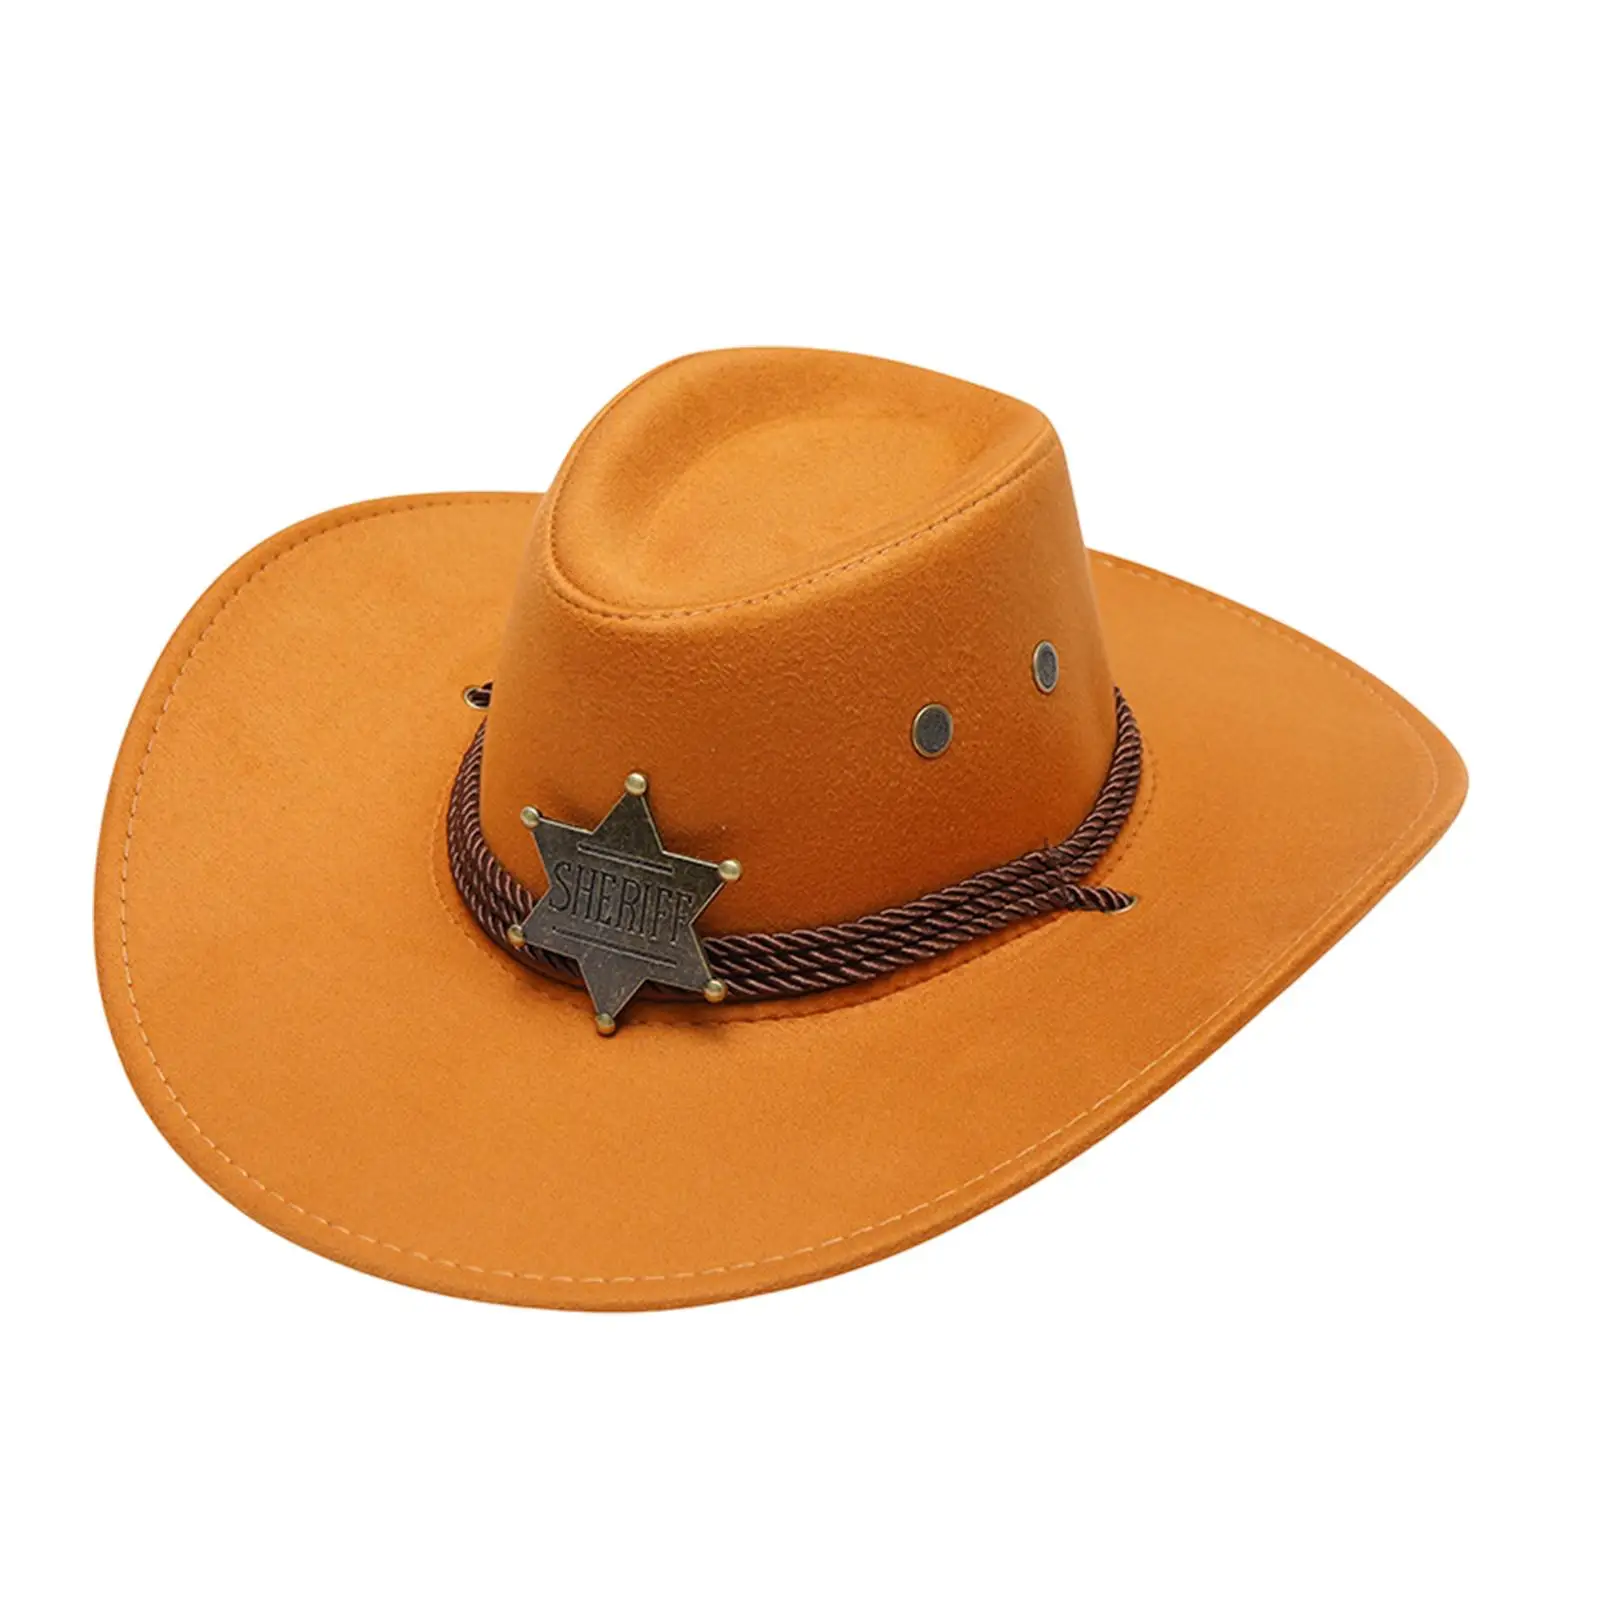 Western Cowboy Hat Men Outdoor Sunshade Hat for Carnival Travel Parties